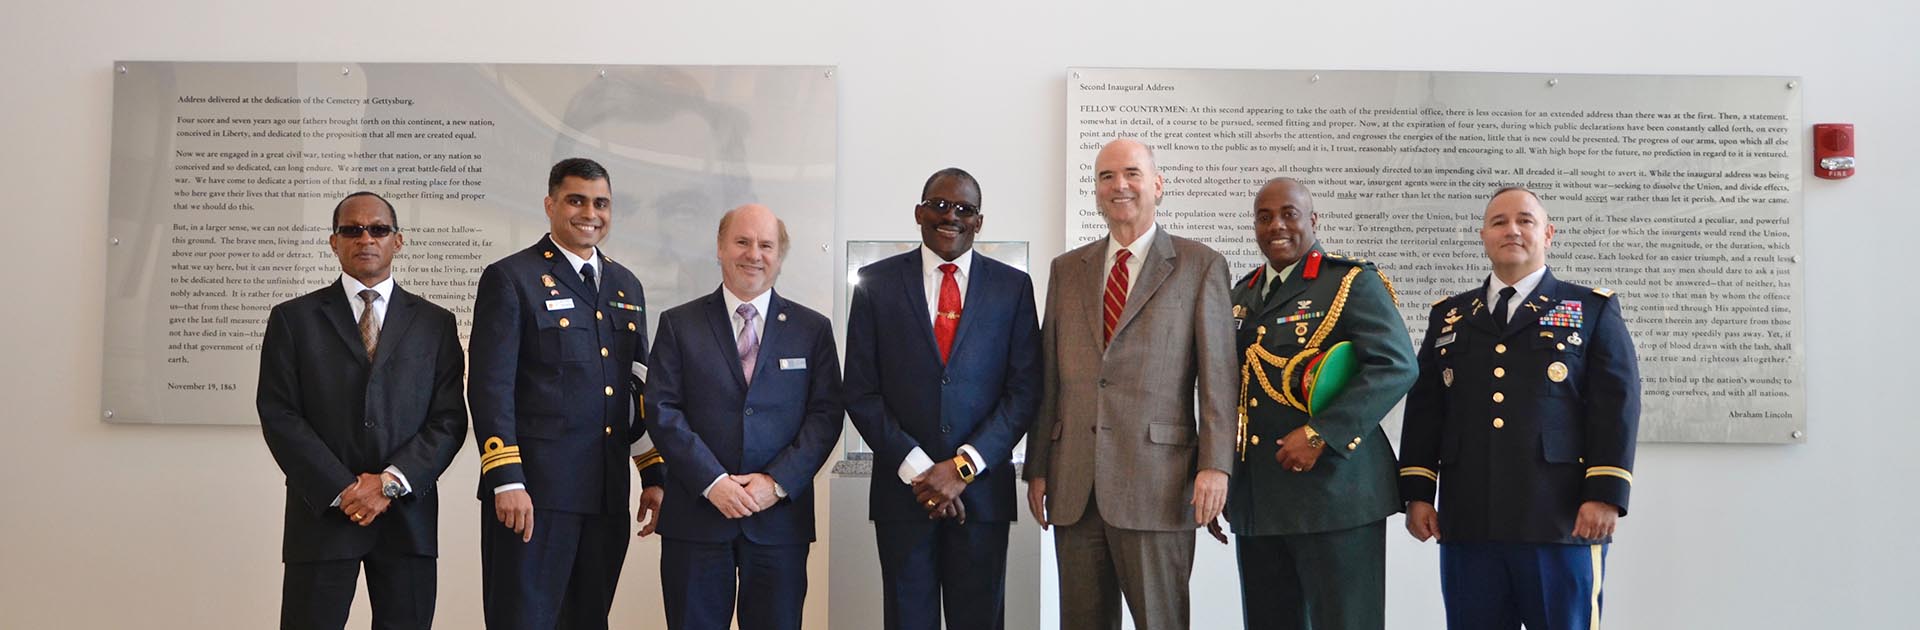 TTO Minister of National Security Visits the Perry Center